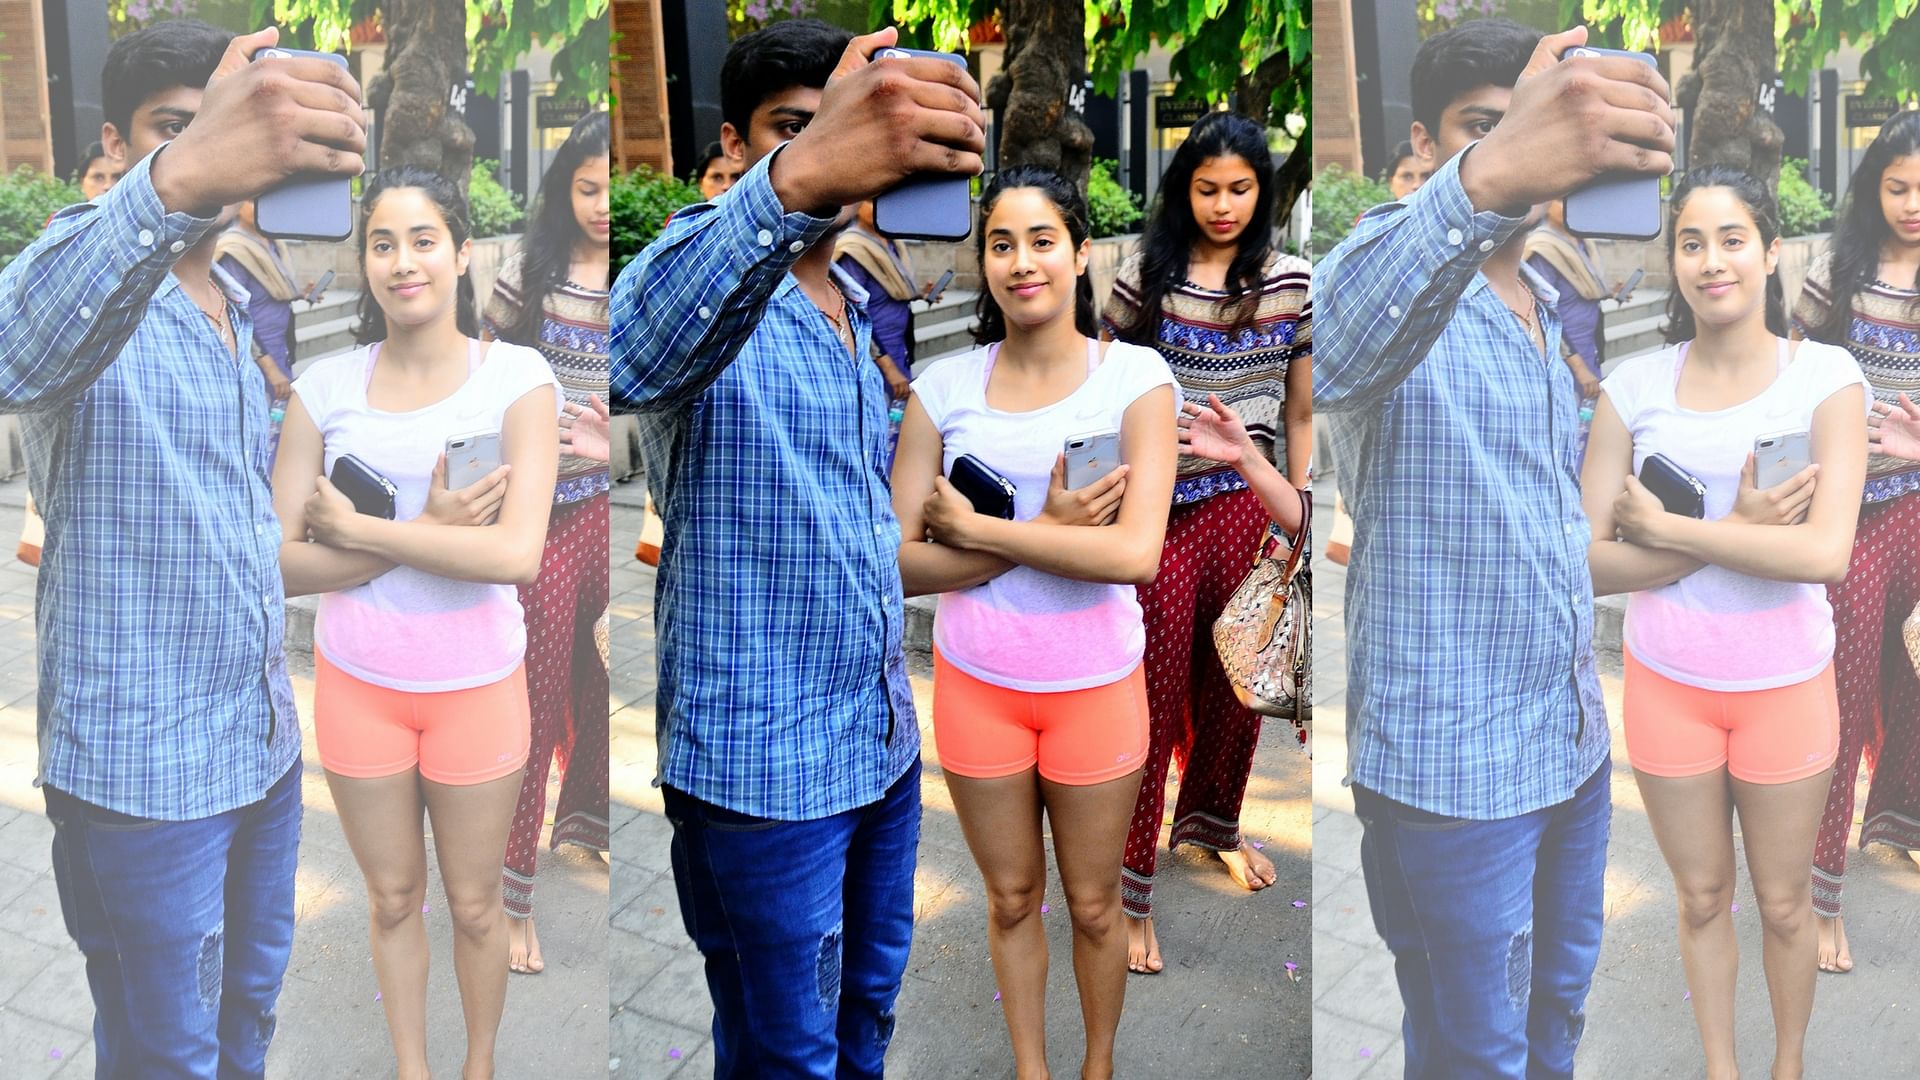 Janhvi poses for a selfie with a fan.